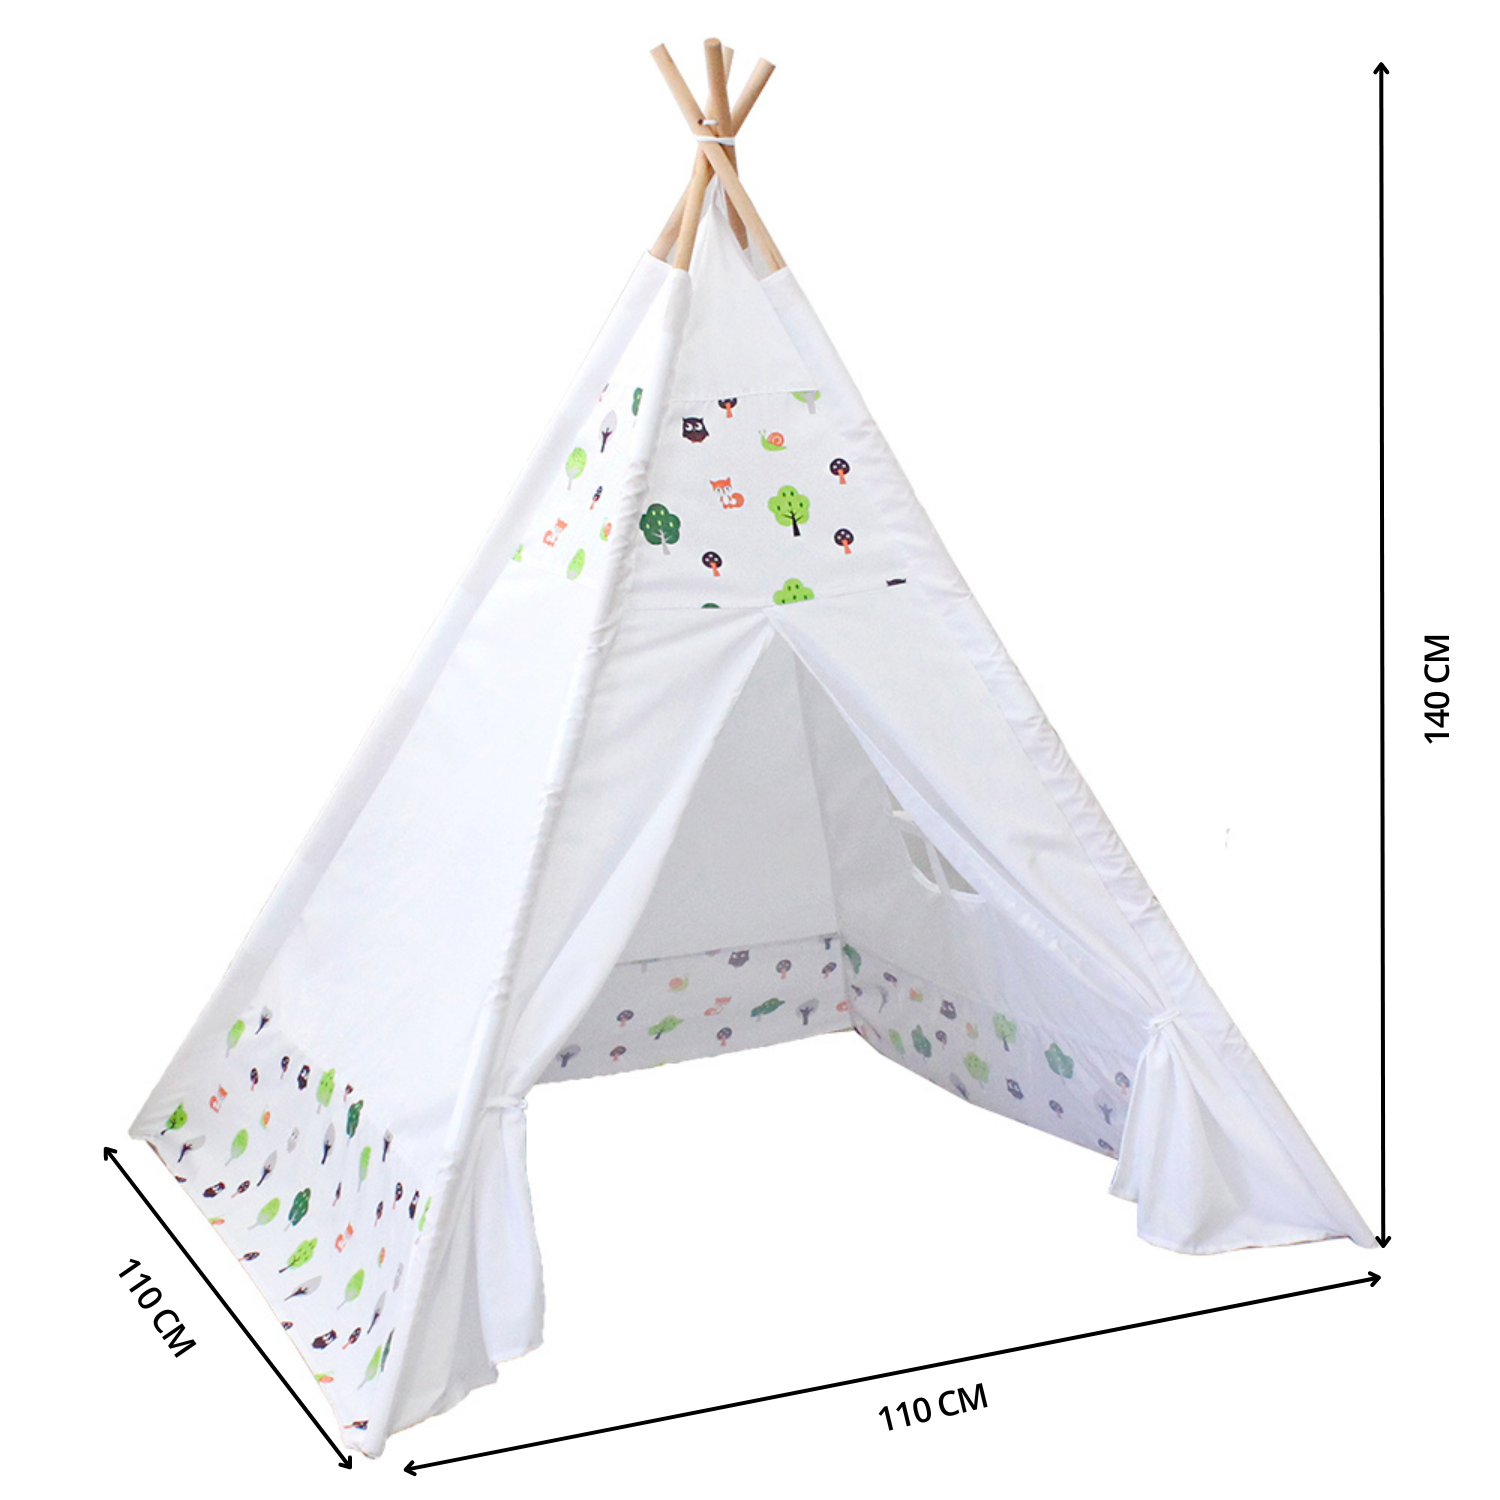 GOMINIMO Kids Teepee Tent with Side Window and Carry Case (White Forest)